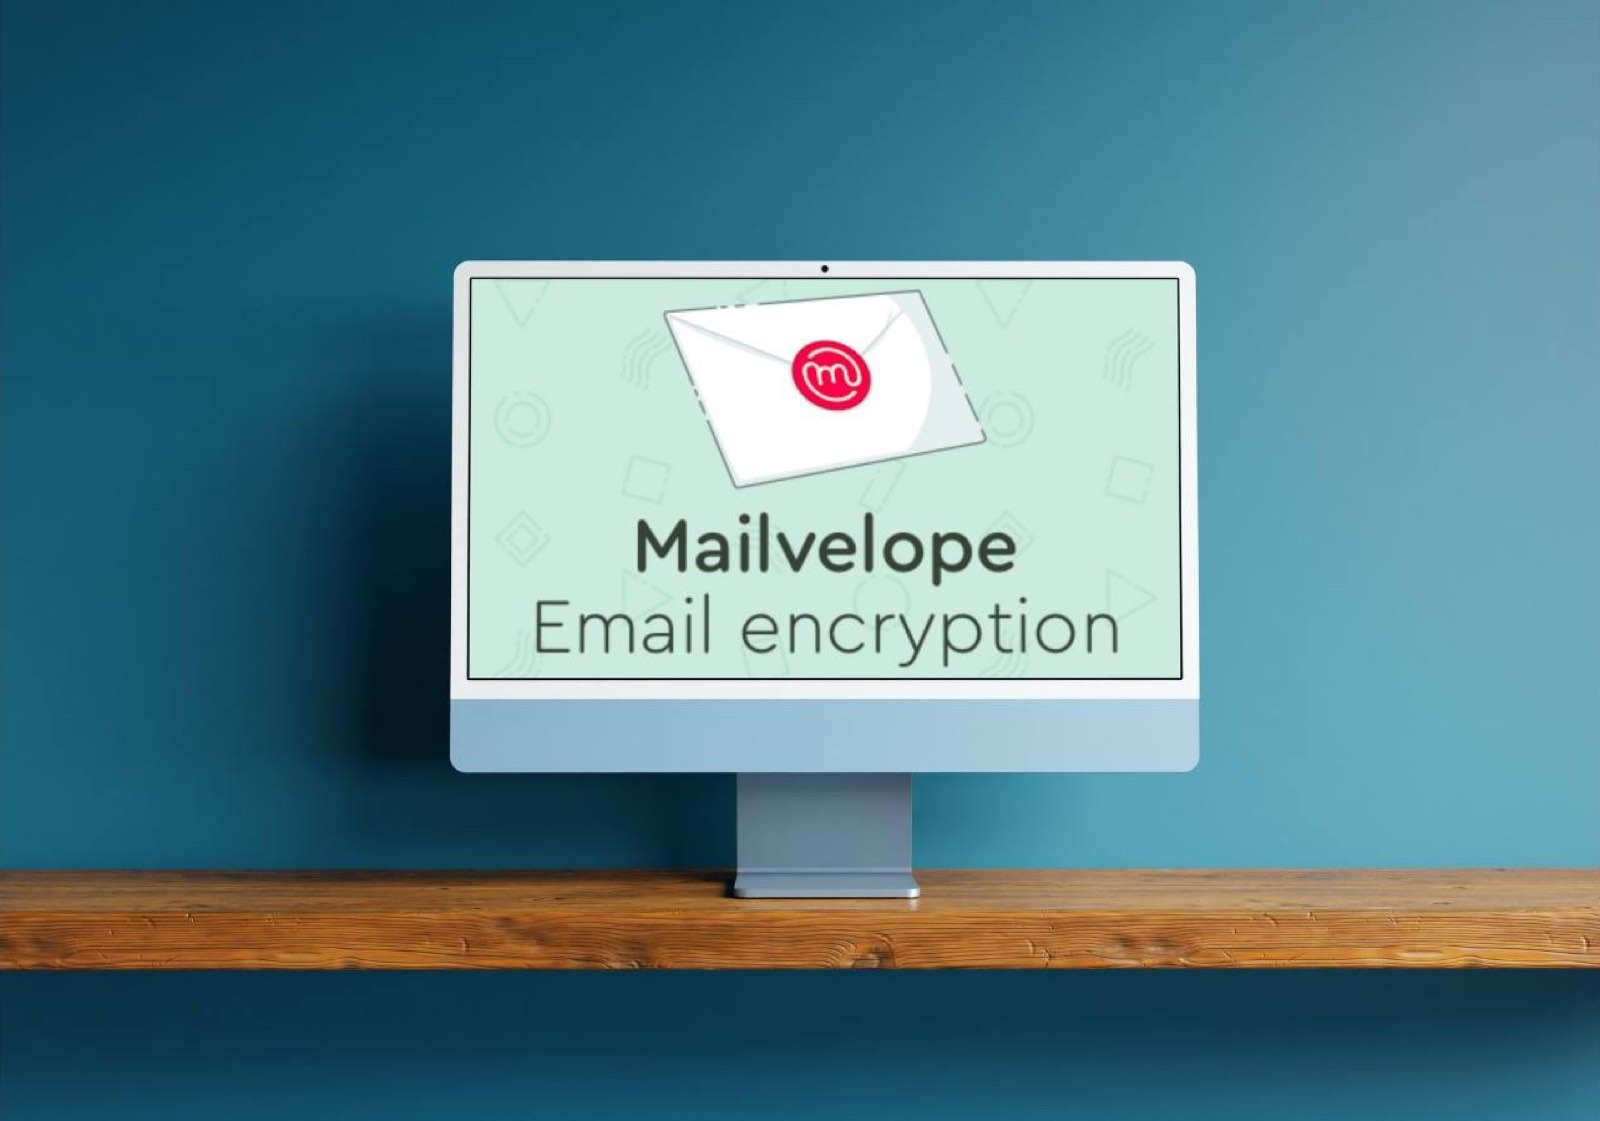 Mailvelope presents itself on screen